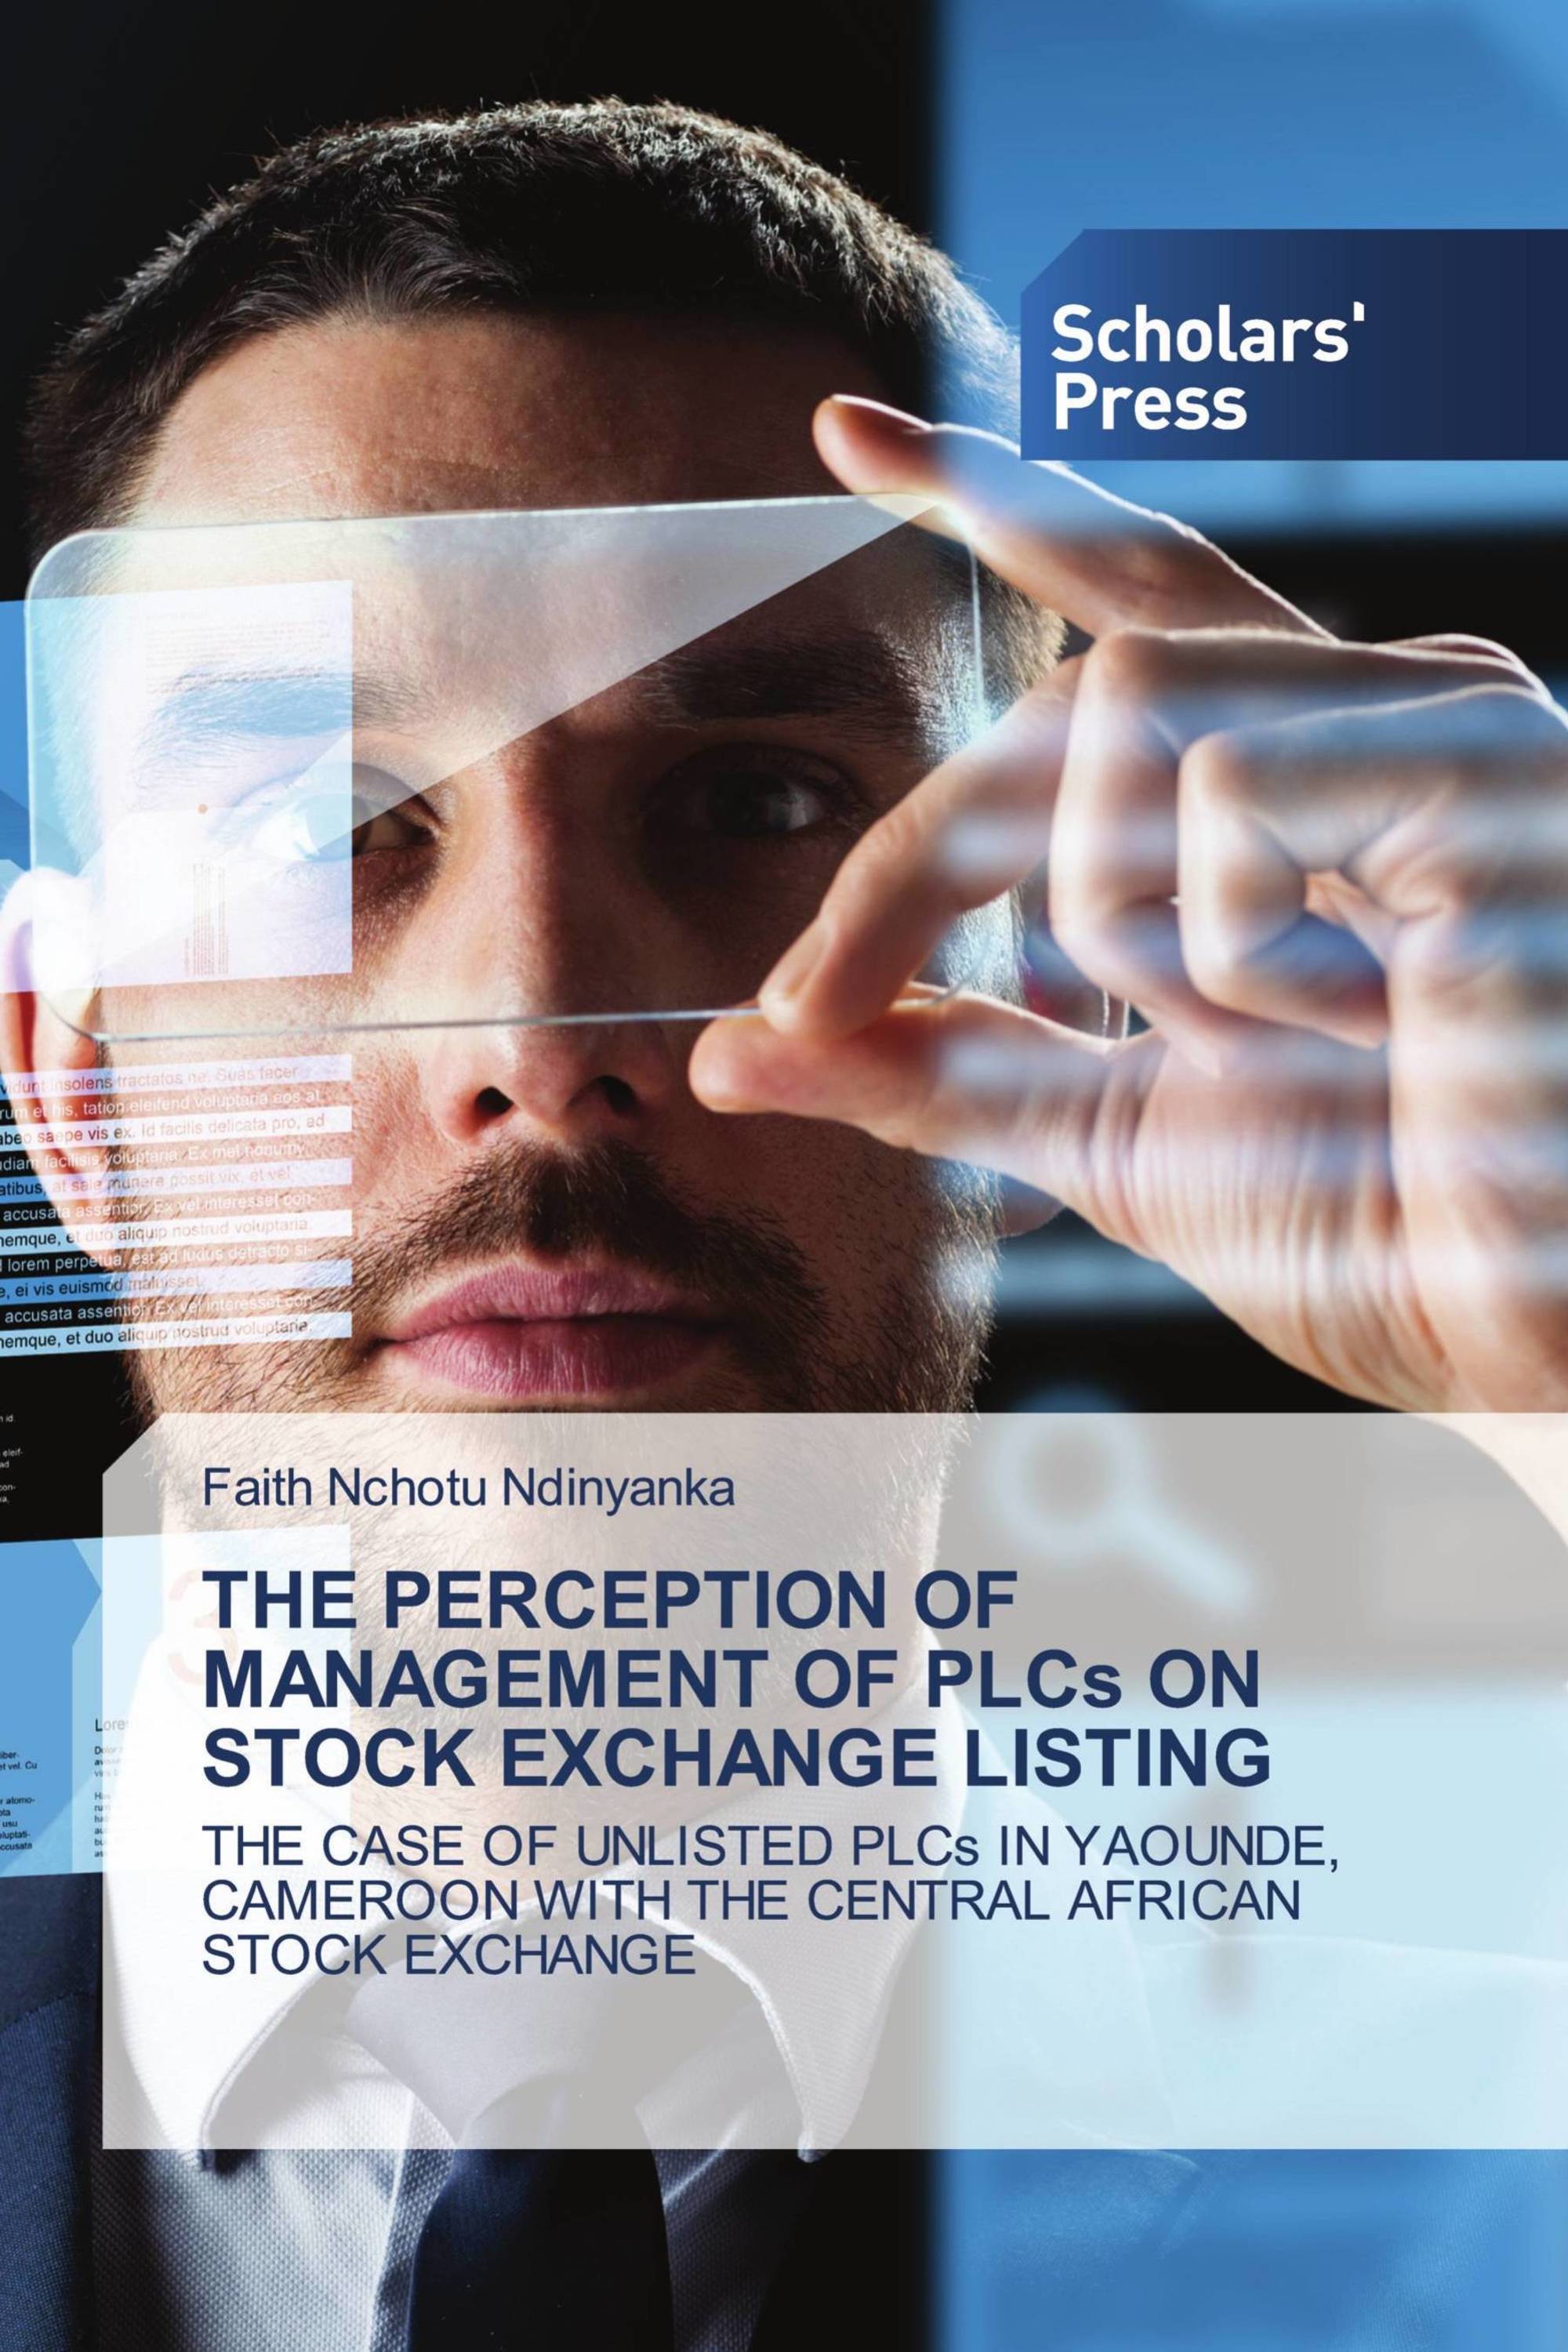 THE PERCEPTION OF MANAGEMENT OF PLCs ON STOCK EXCHANGE LISTING